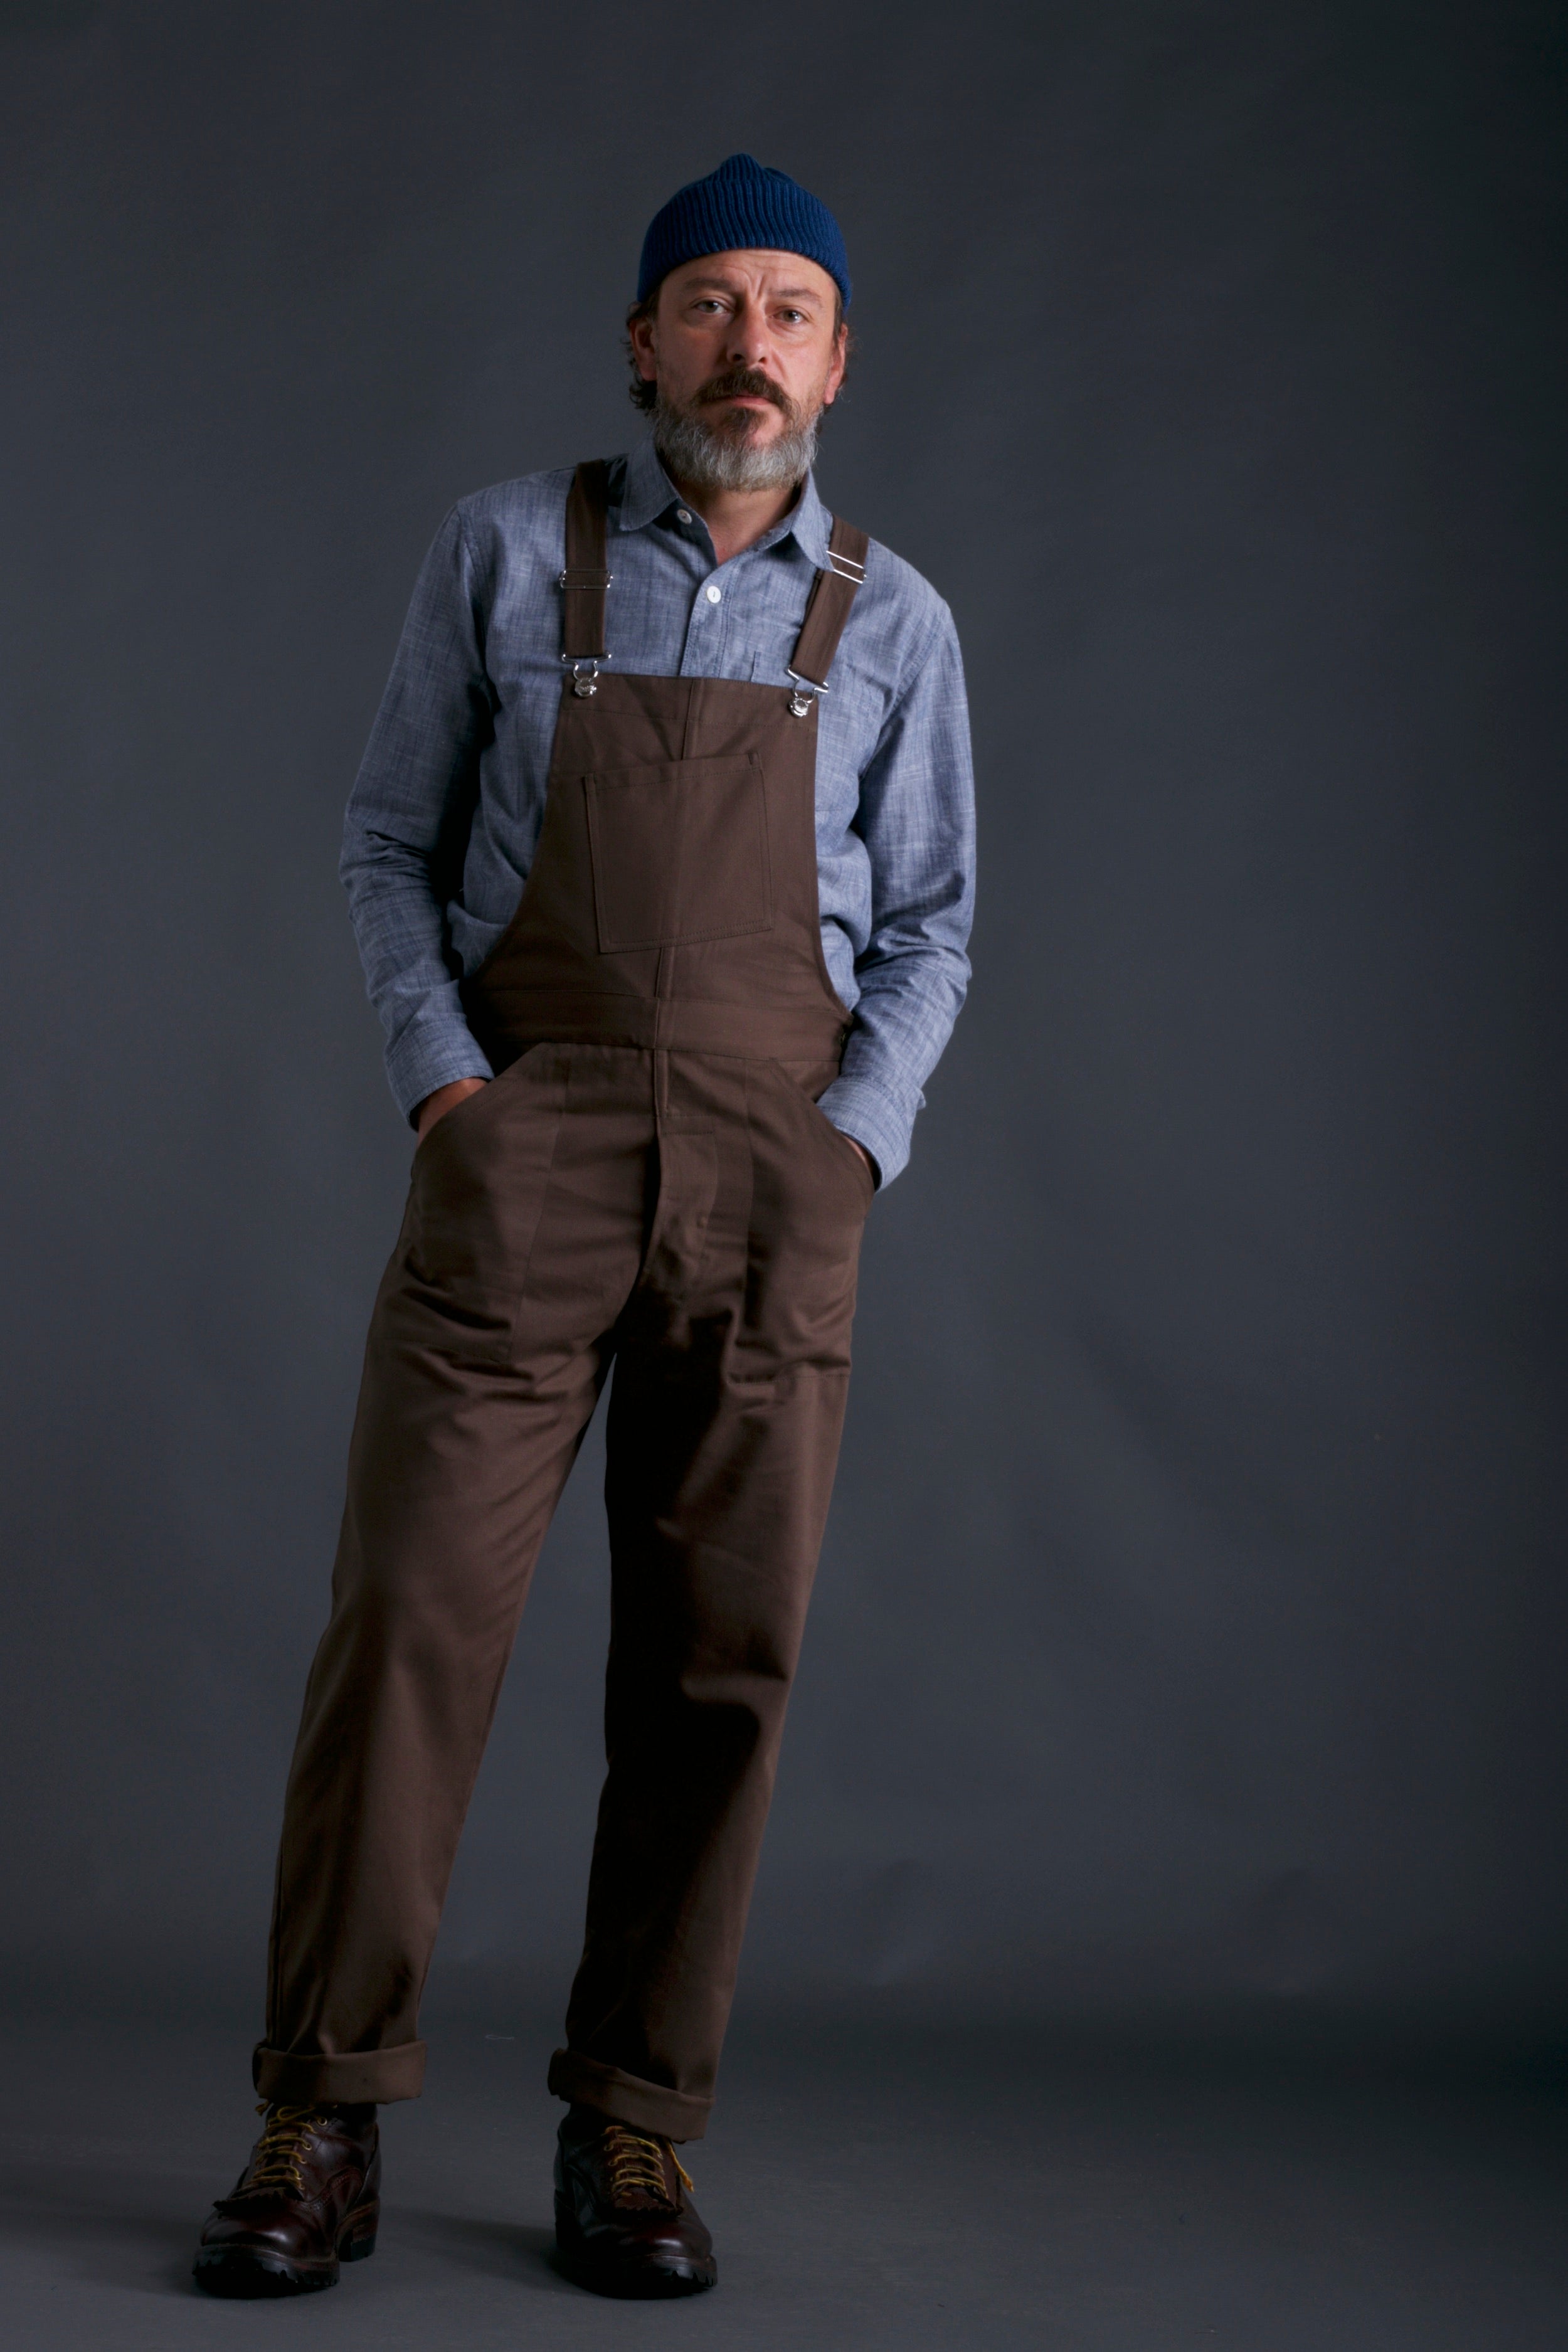 Man wears Carrier Company Men's Dungarees in Olive with Chambray Shirt and Petrol Blue Wool Merino Hat